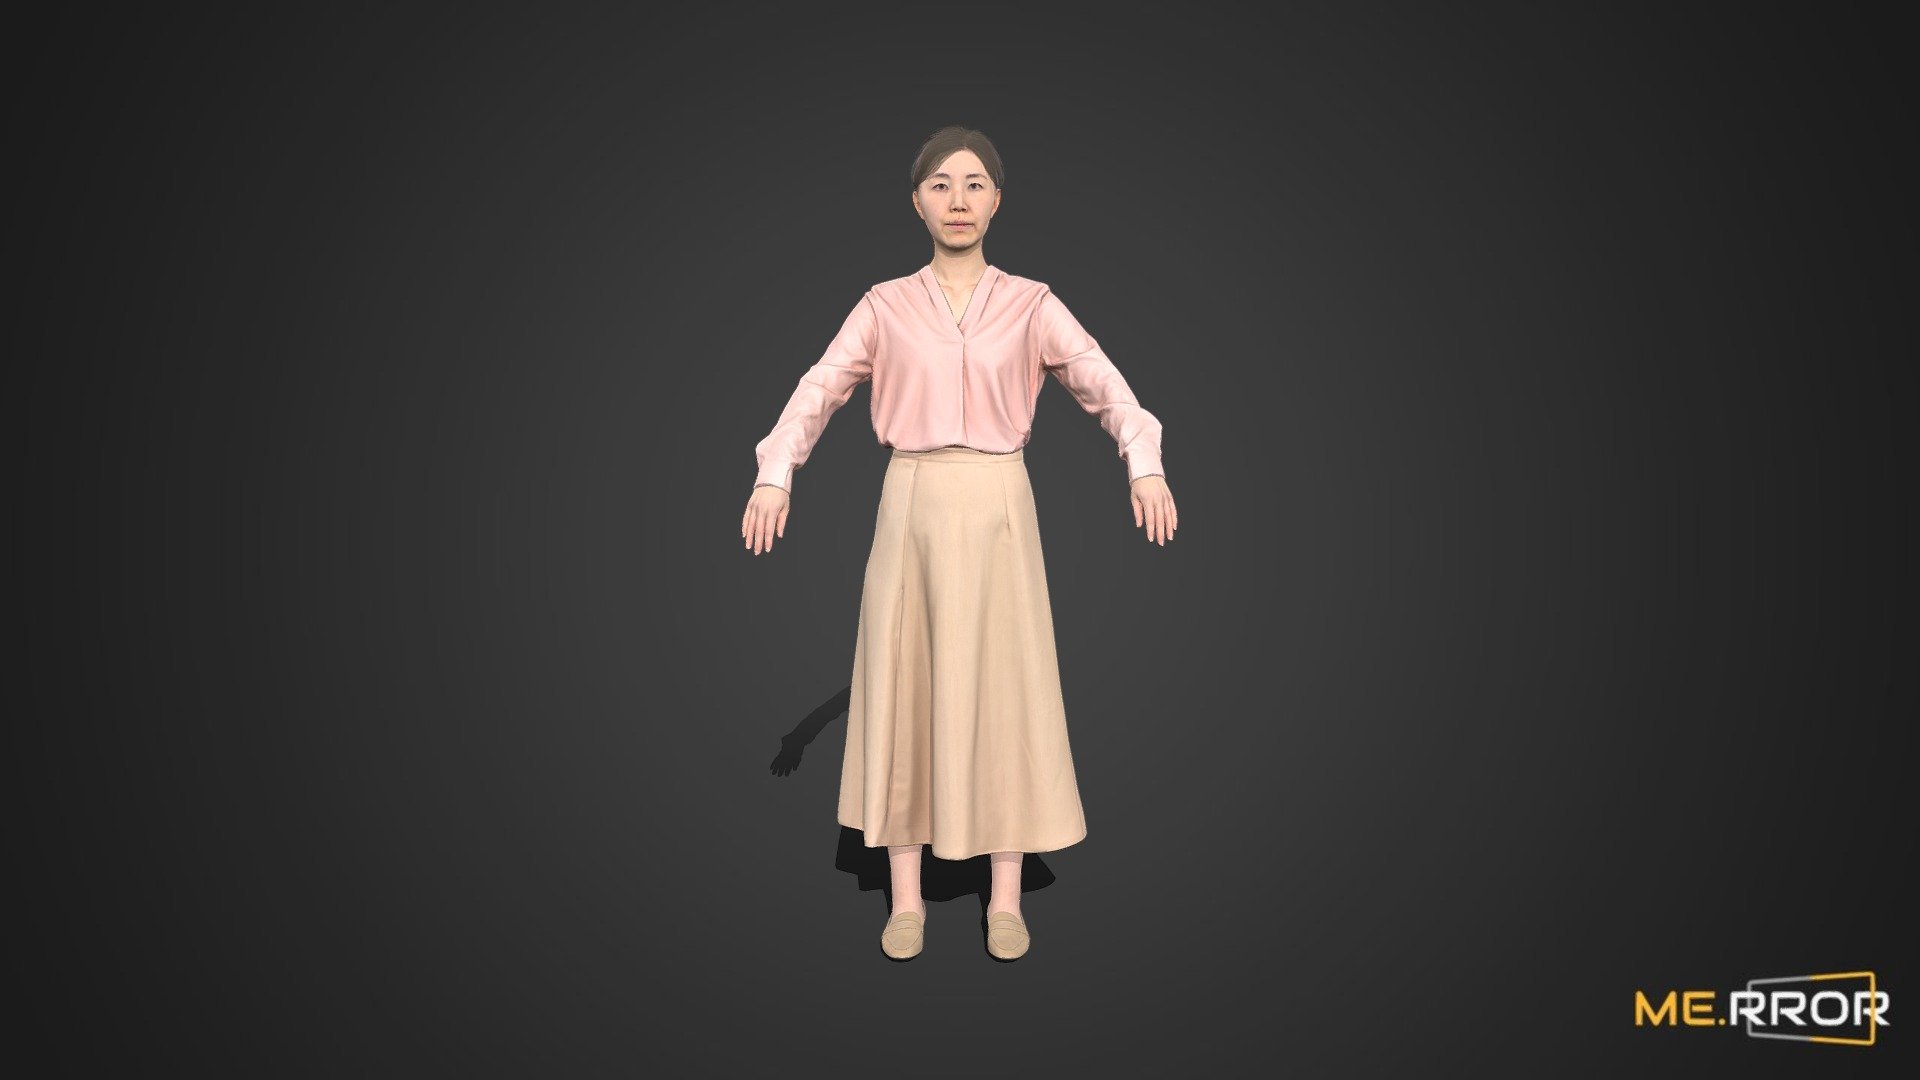 ME.RROR


From 3D models of Asian individuals to a fresh selection of free assets available each month - explore a richer diversity of photorealistic 3D assets at the ME.RROR asset store!

https://me-rror.com/store




[Model Info]




Model Formats : FBX, MAX

Texture Maps (8K) : Diffuse, Normal, Opacity

If you encounter any problems using this model, please feel free to contact us. We'd be glad to help you.



[About ME.RROR]

Step into the future with ME.RROR, South Korea's leading 3D specialist. Bespoke creations are not just possible; they are our specialty.

Service areas:




3D scanning

3D modeling

Virtual human creation

Inquiries: https://merror.channel.io/lounge - [Game-ready] Asian Woman Scan A-Posed 10 - Buy Royalty Free 3D model by ME.RROR Studio (@merror) 3d model